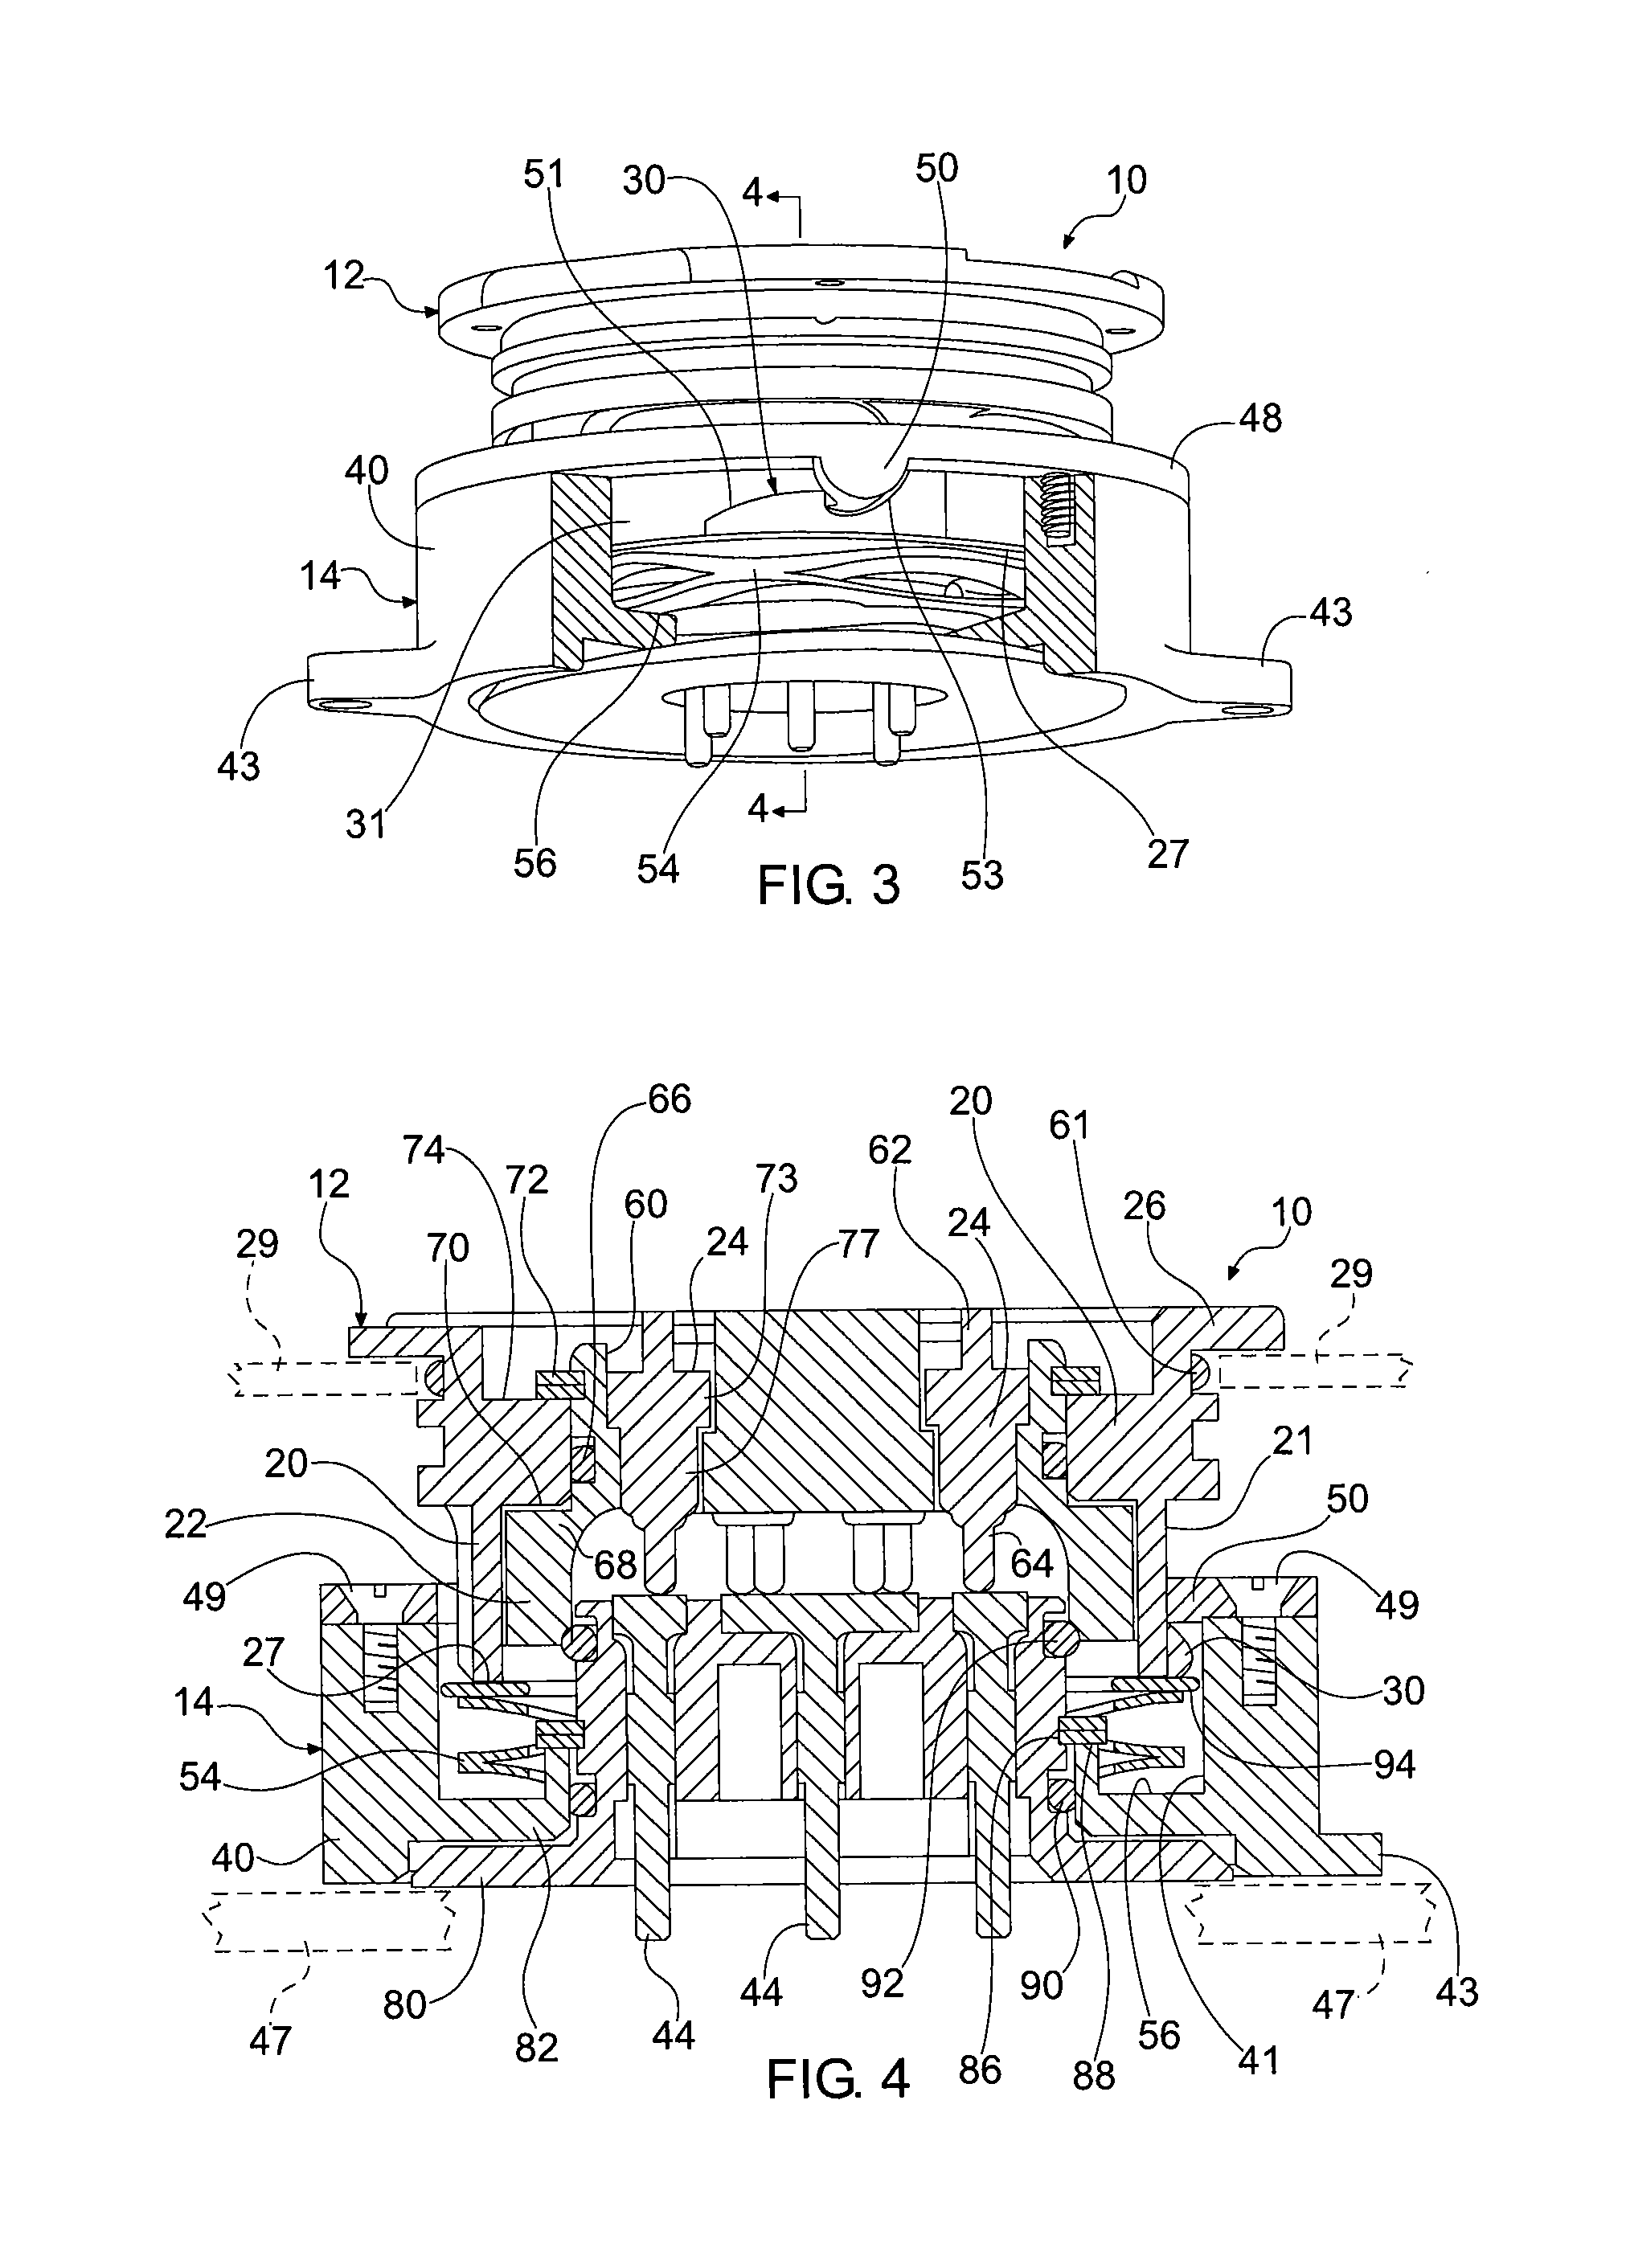 Electrical connector including a bayonet locking device